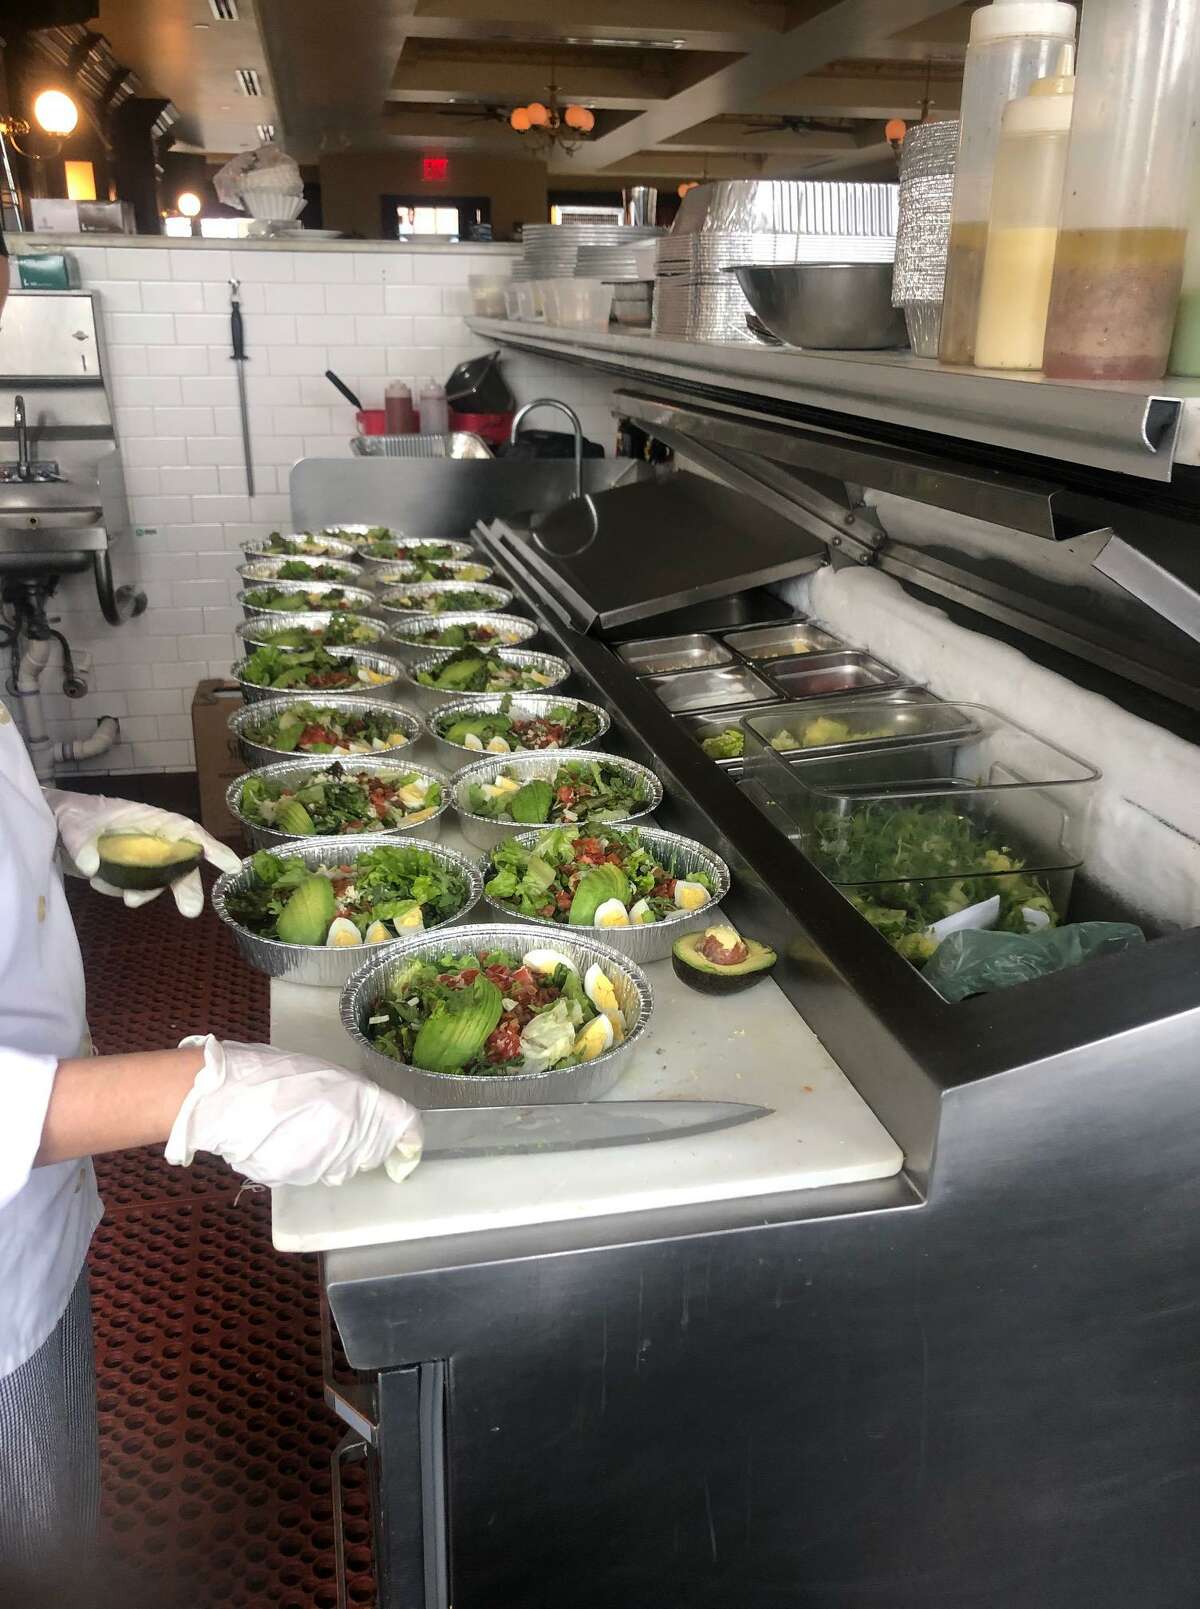 Corbin Cares is going back to work for Darien, this time supporting teachers and Darien's emergency responders. Meals will be provided by the town's restaurants, which are also struggling due to the pandemic, and will benefit from the incremental income.